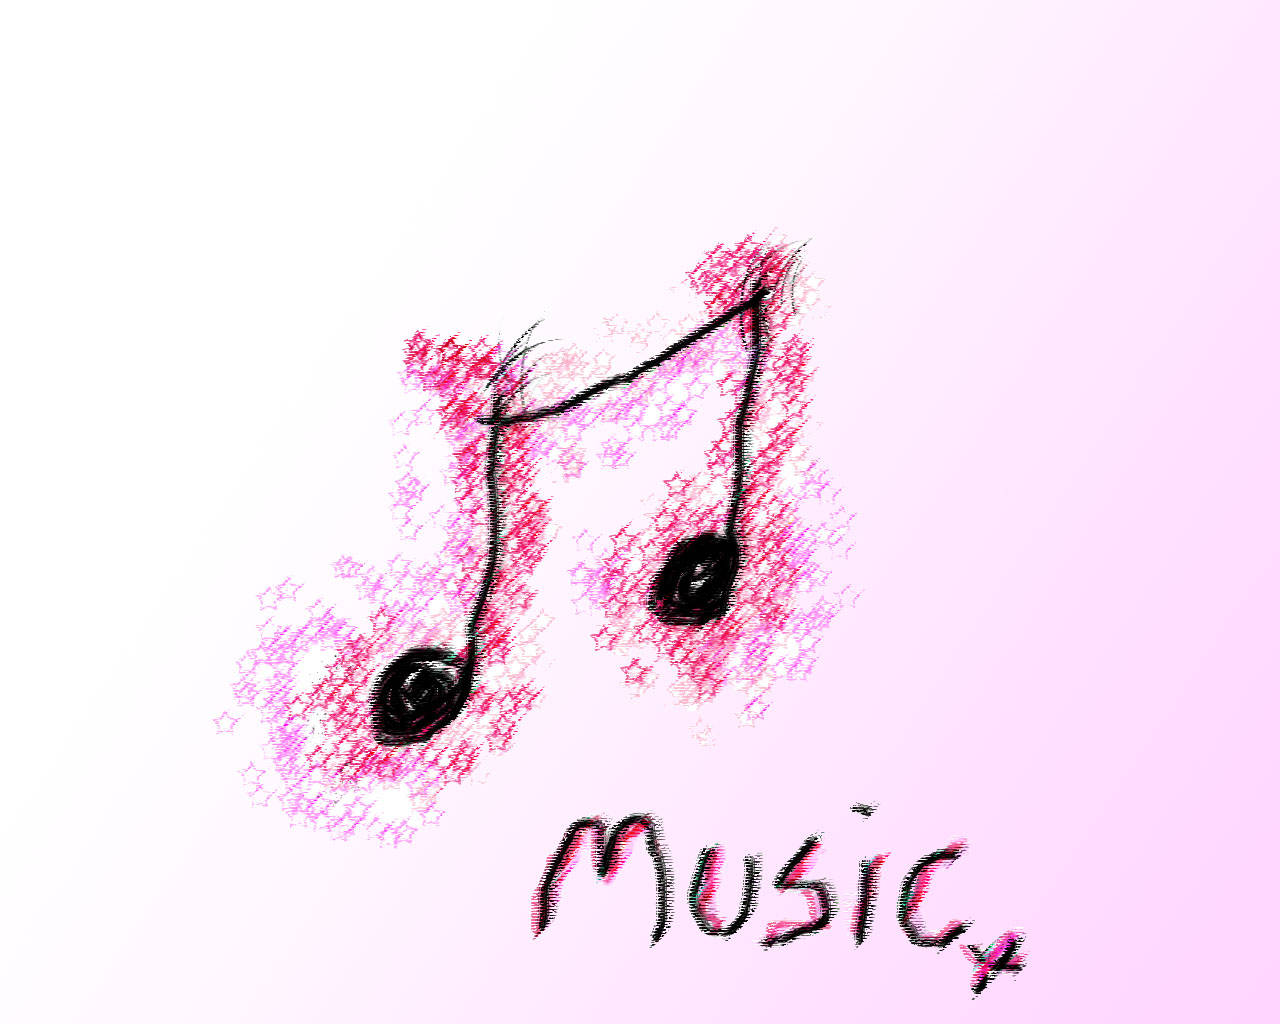 Free Cute Music Wallpaper Downloads, [100+] Cute Music Wallpapers for FREE  